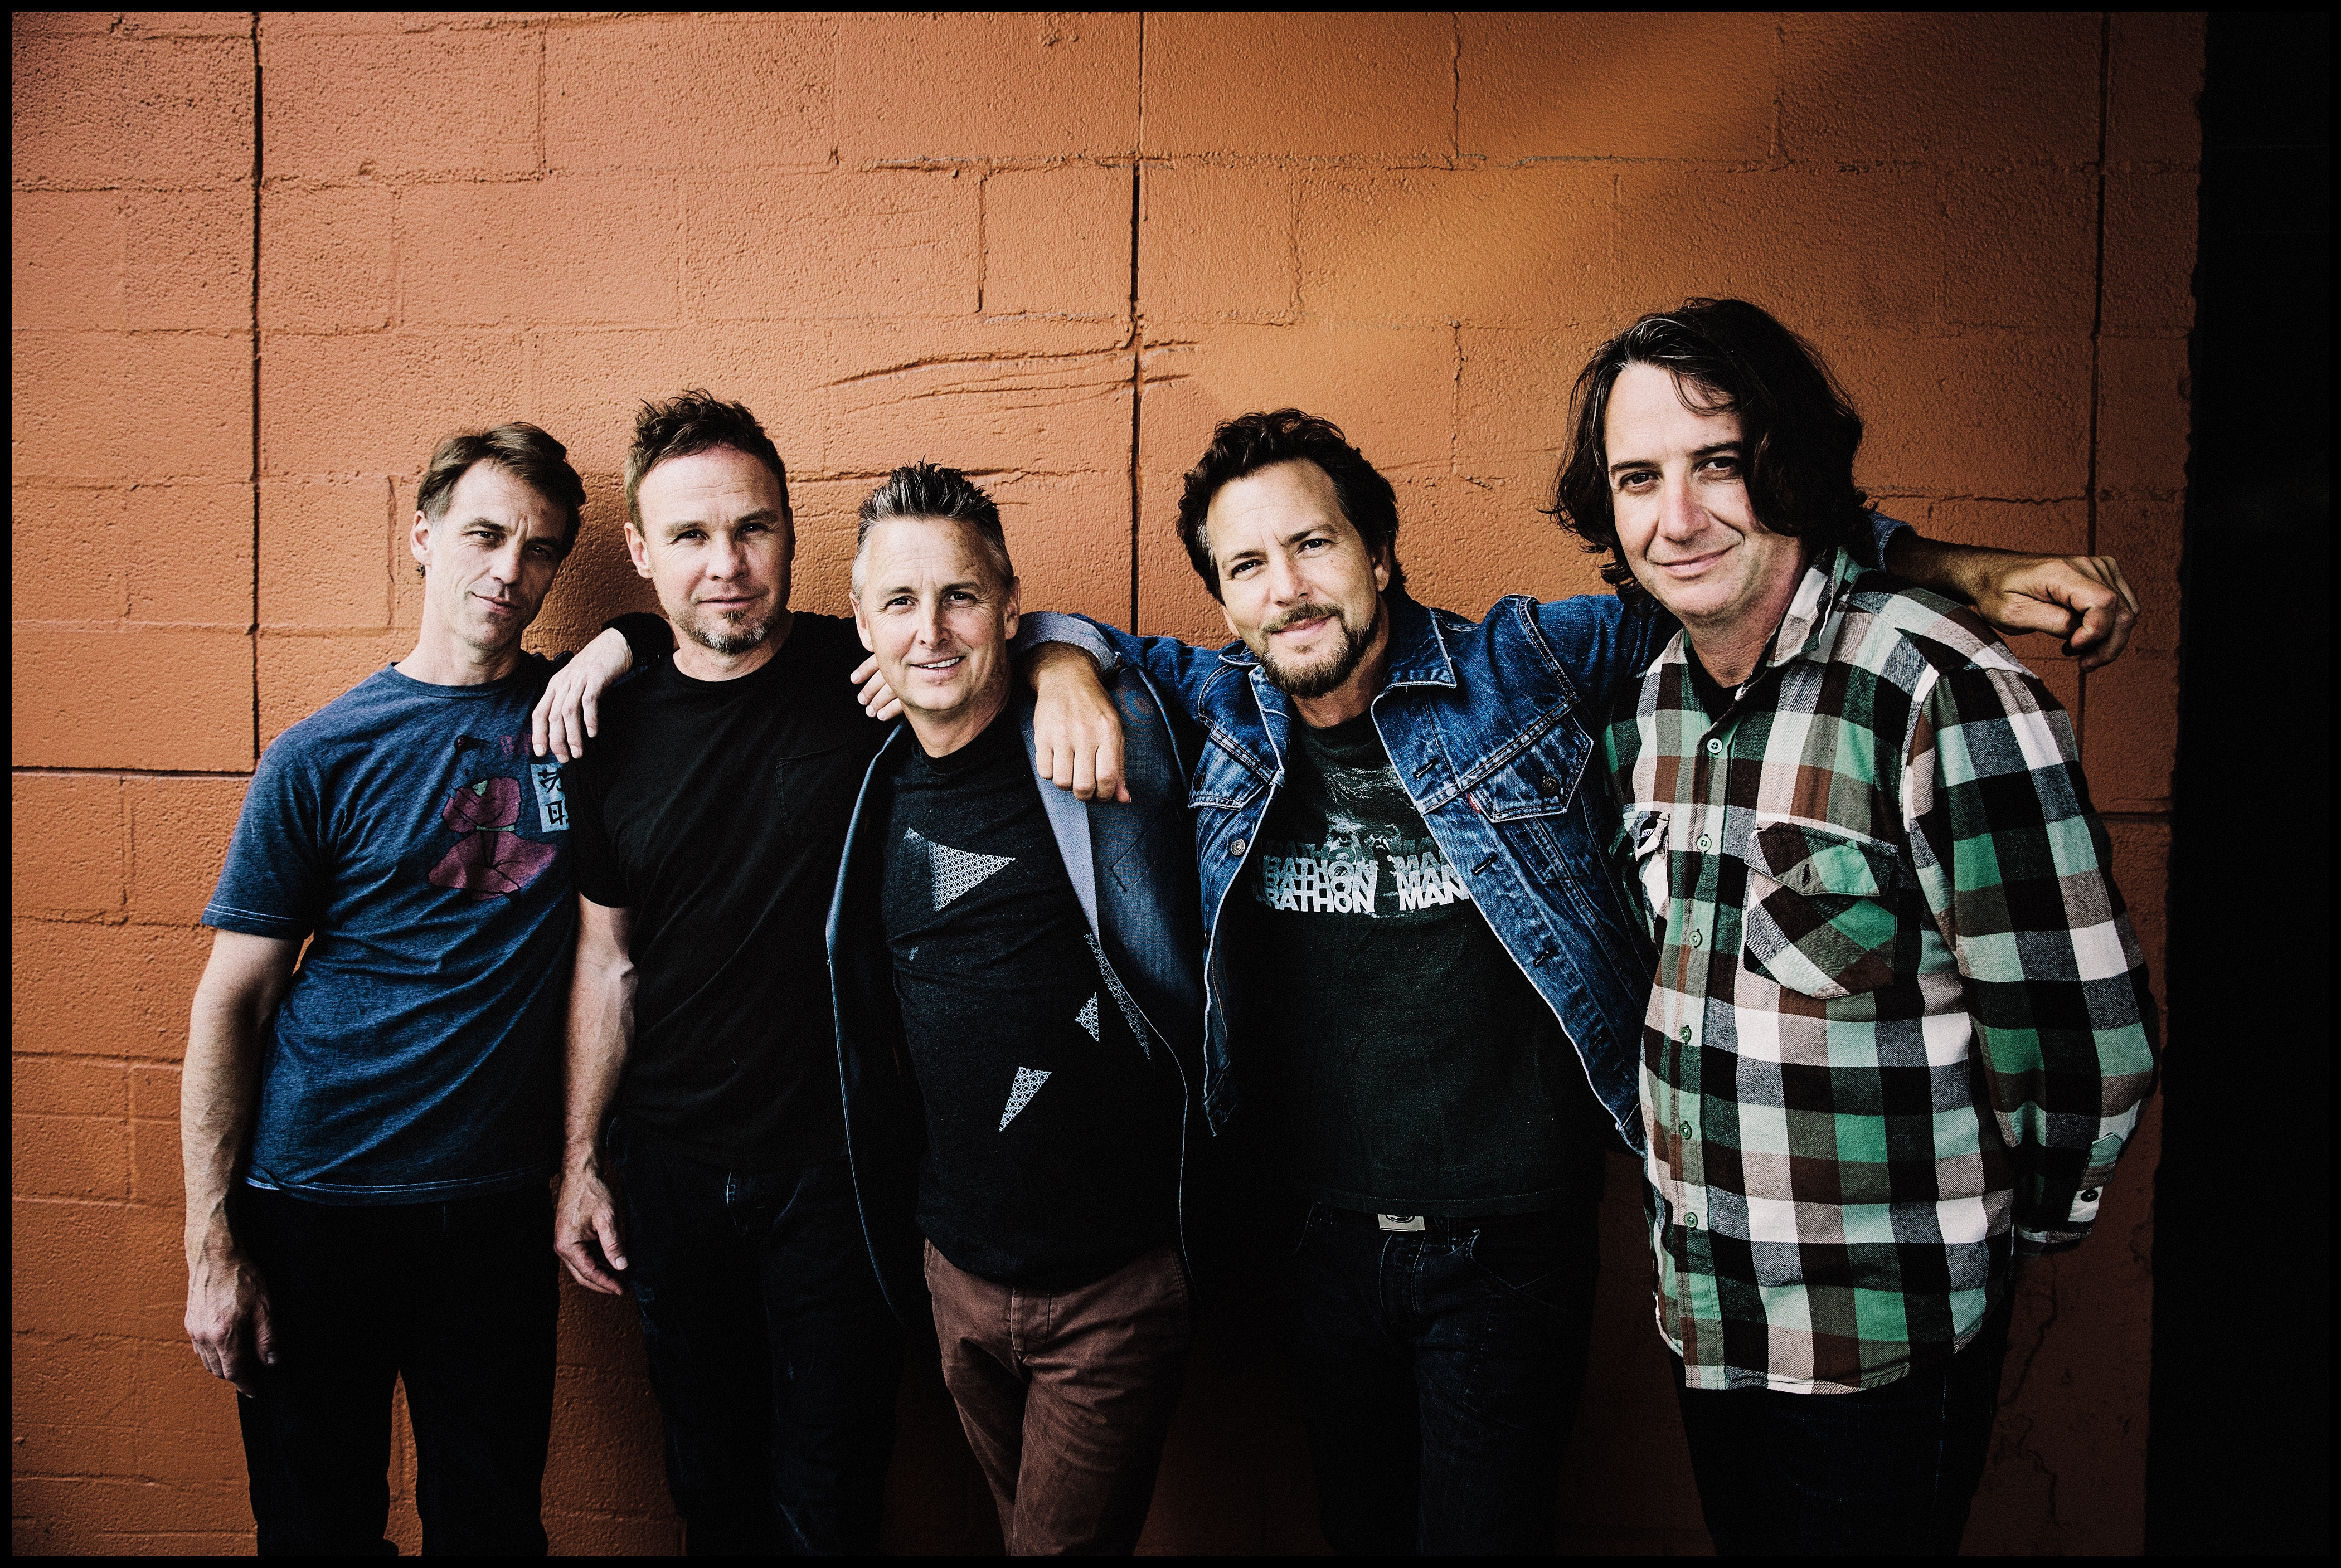 The members of Pearl Jam pose in front of a brown cinderblock wall